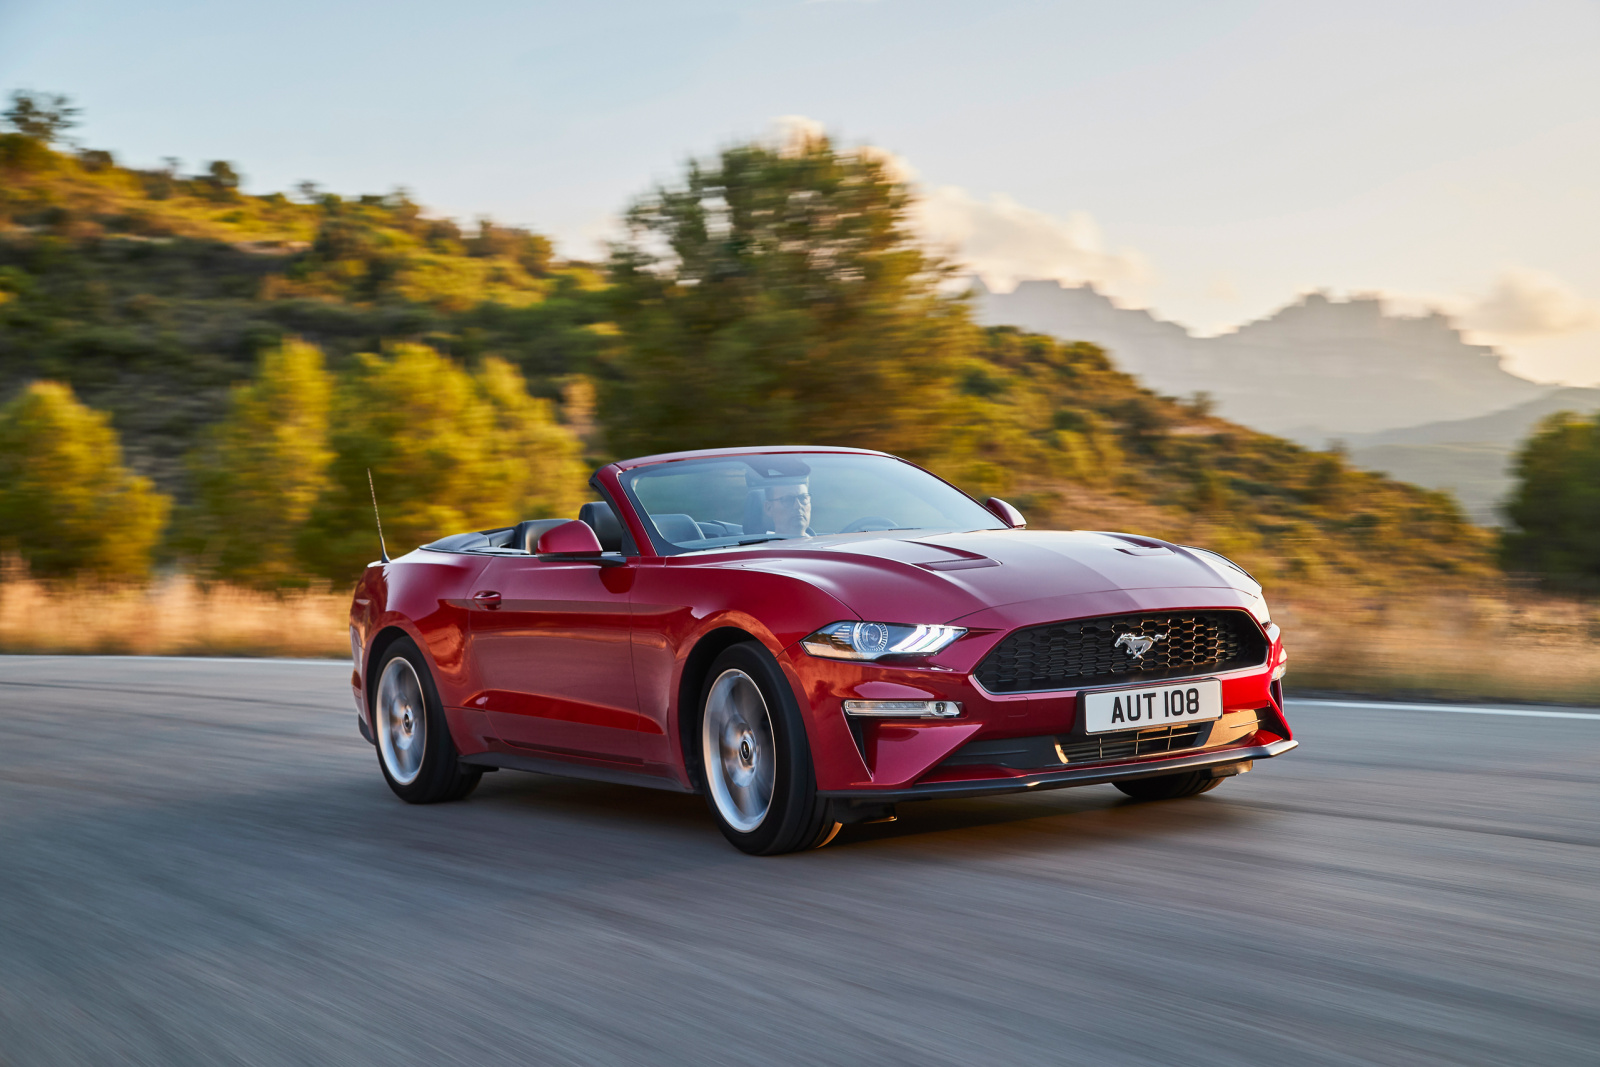 Ford Mustang Convertible-Cabriolet (2018) - Foto eines Ford PKW-Modells